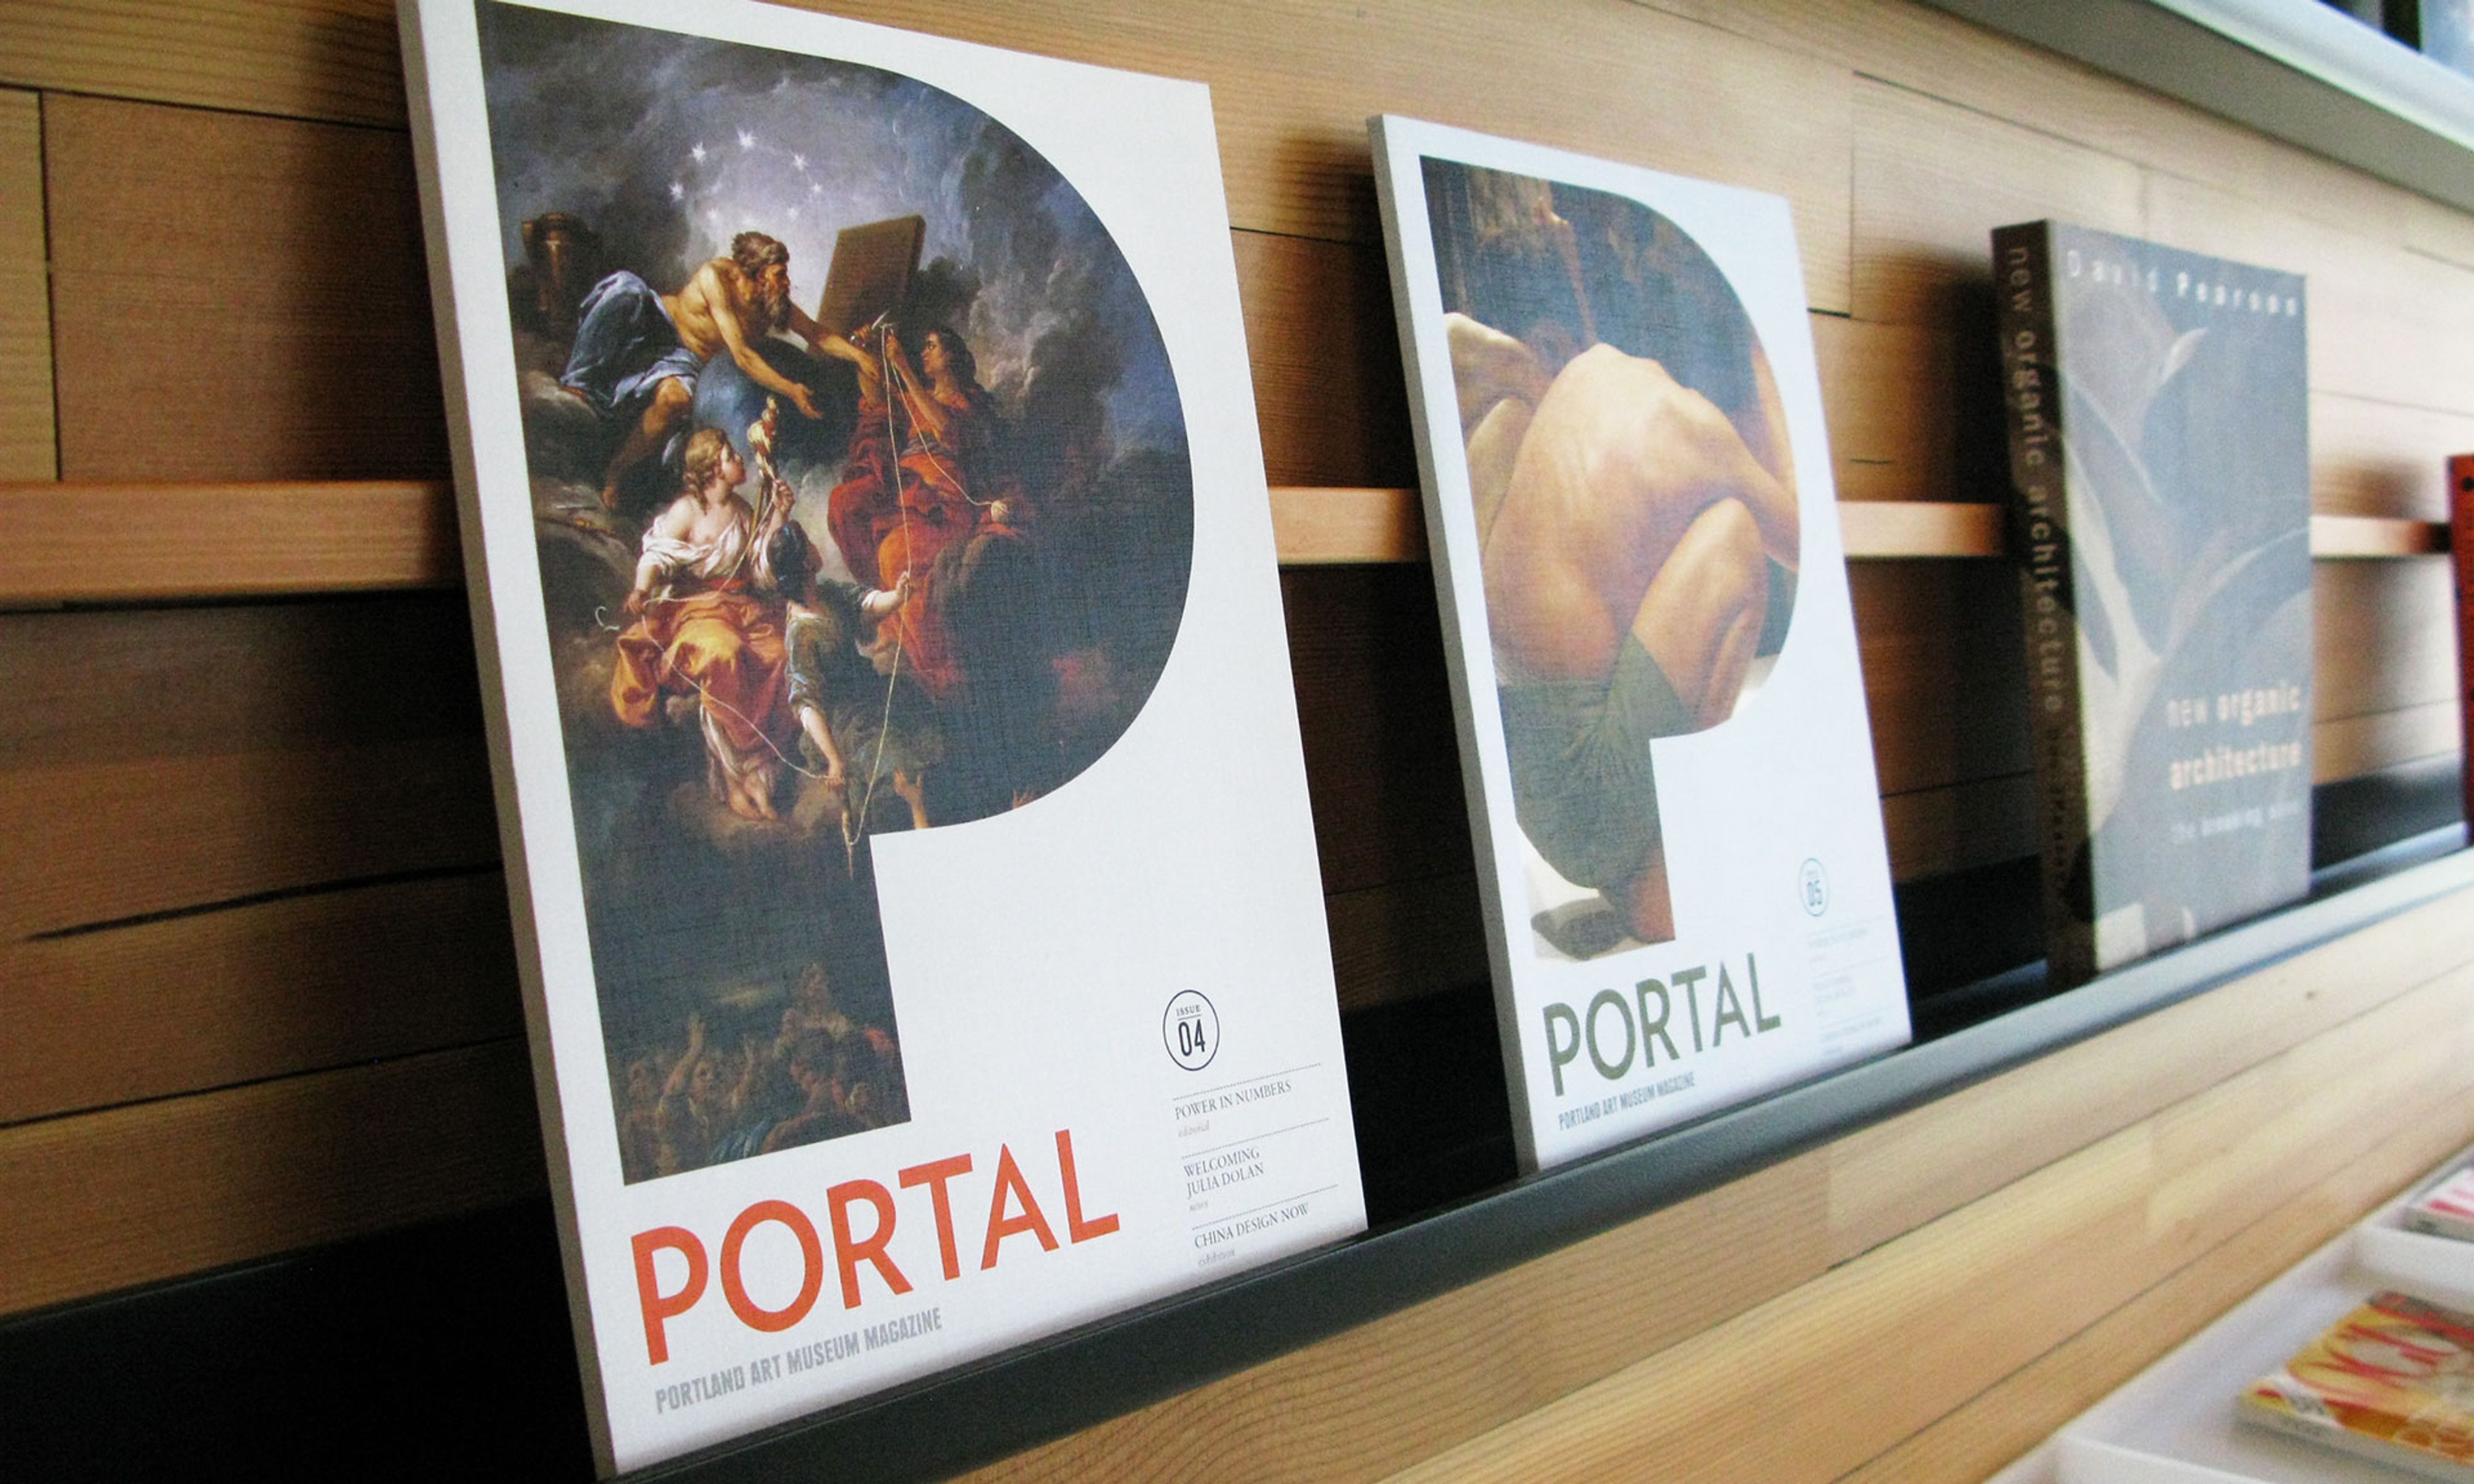 Two copies of the Portland Art Museum Magazine that feature large stylized P shapes that contain classical works of art